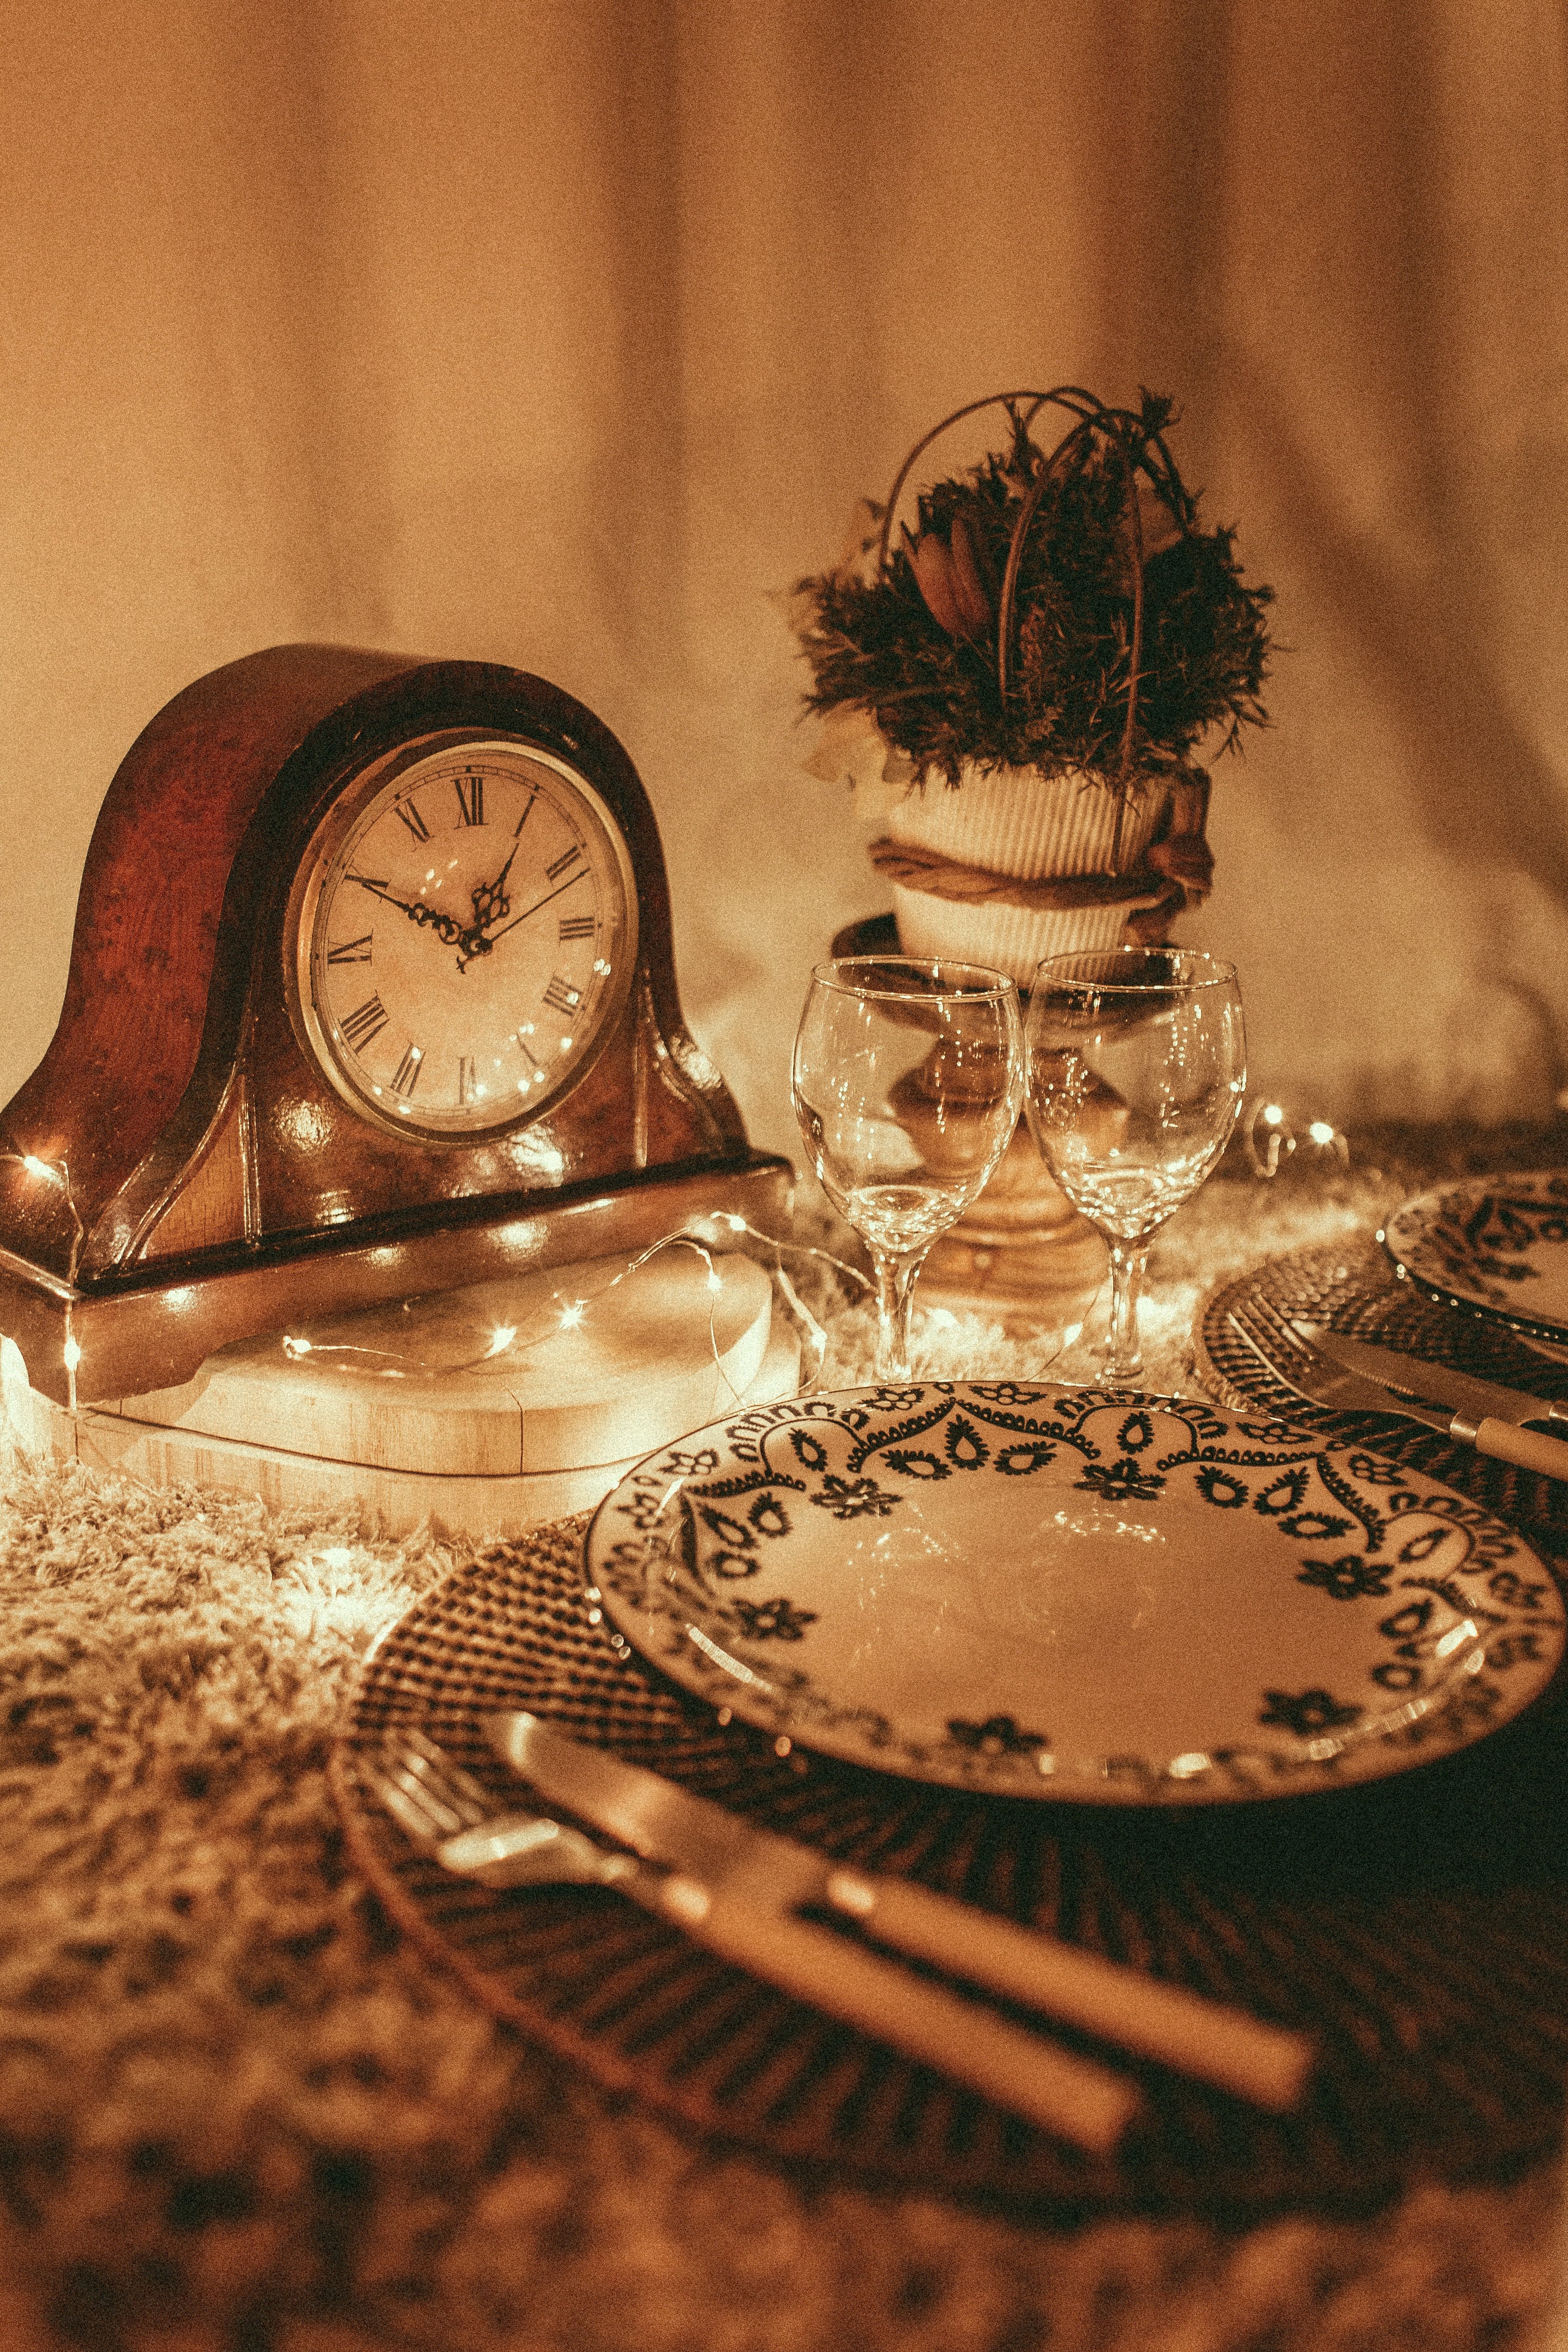 Cora prepared a special dinner for Eric | Source: Unsplash